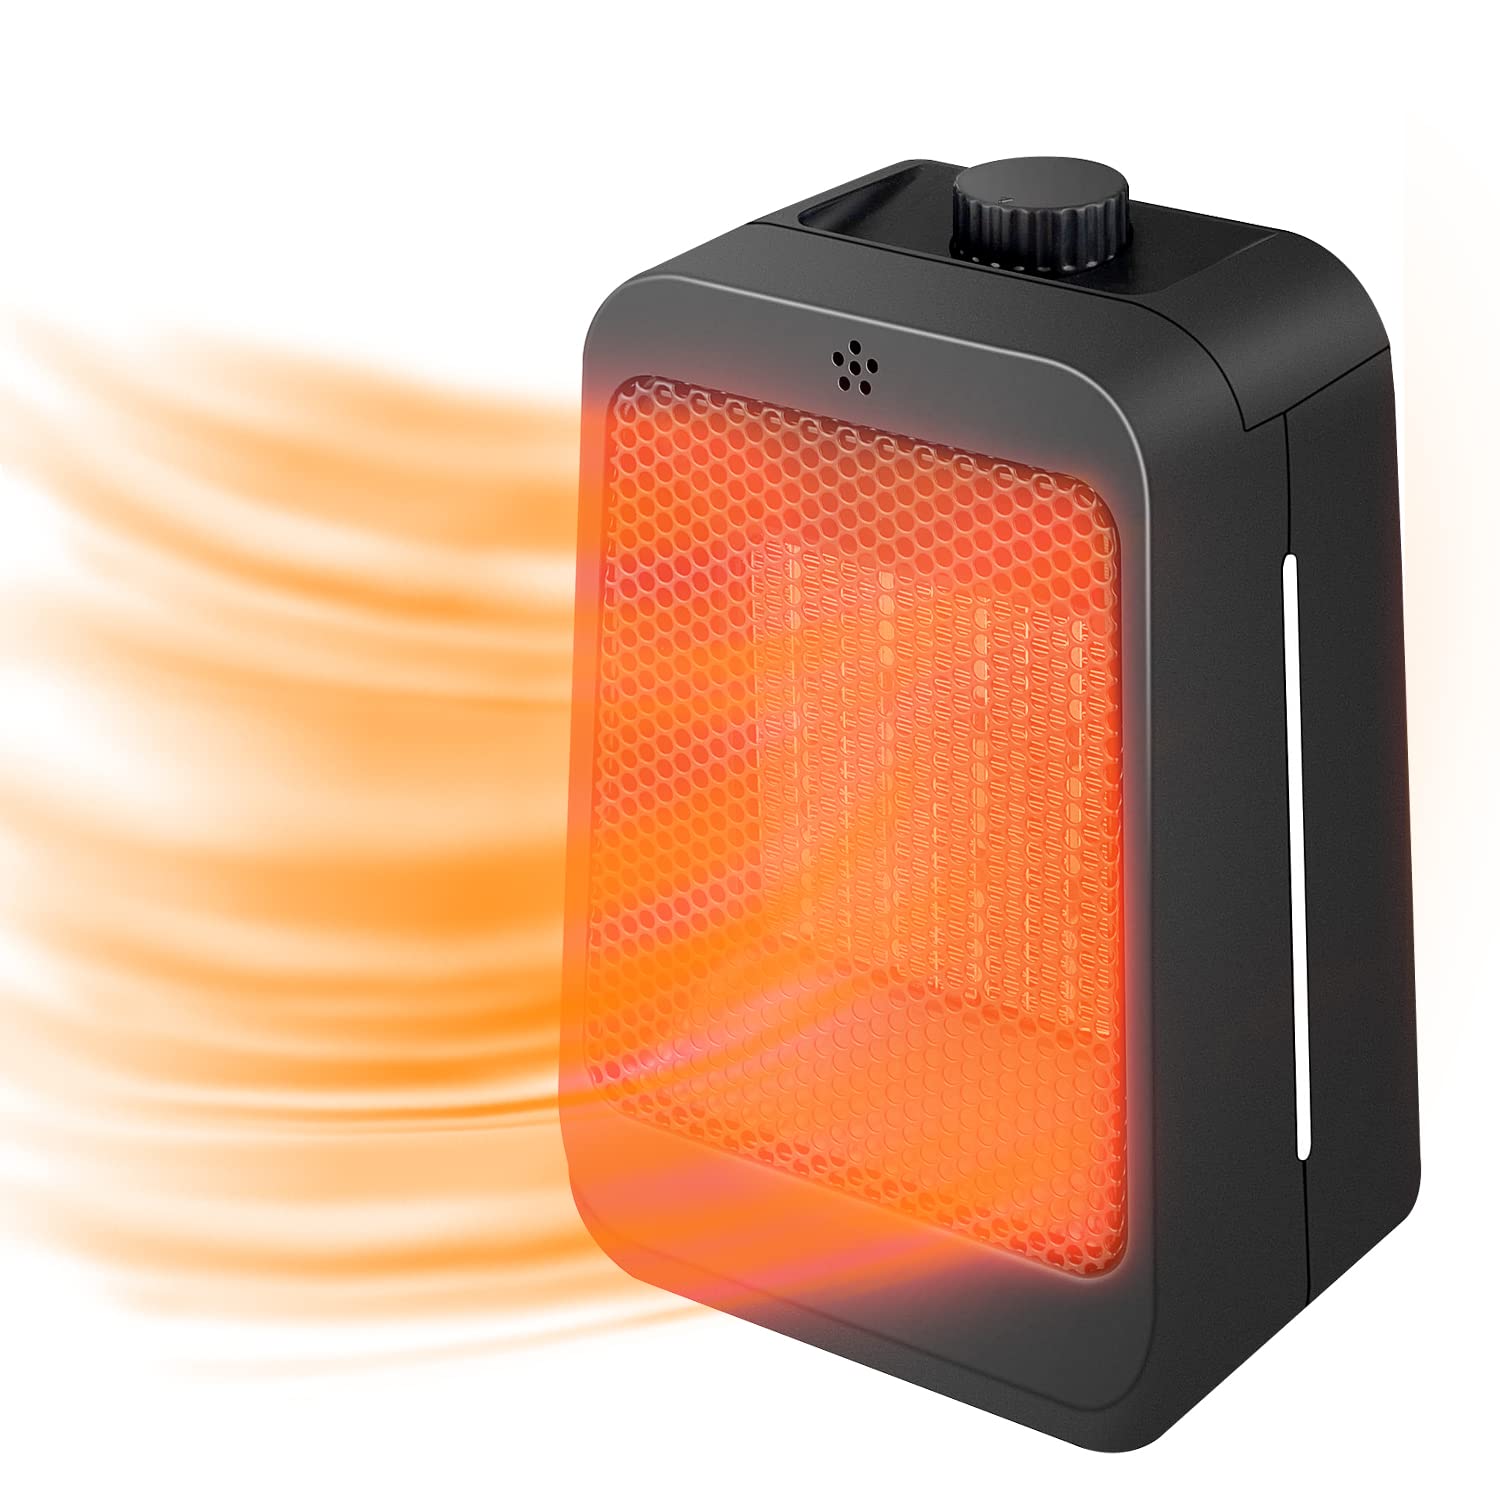 get-cozy-with-this-1500w-indoor-ceramic-space-heater-on-sale-for-33-97